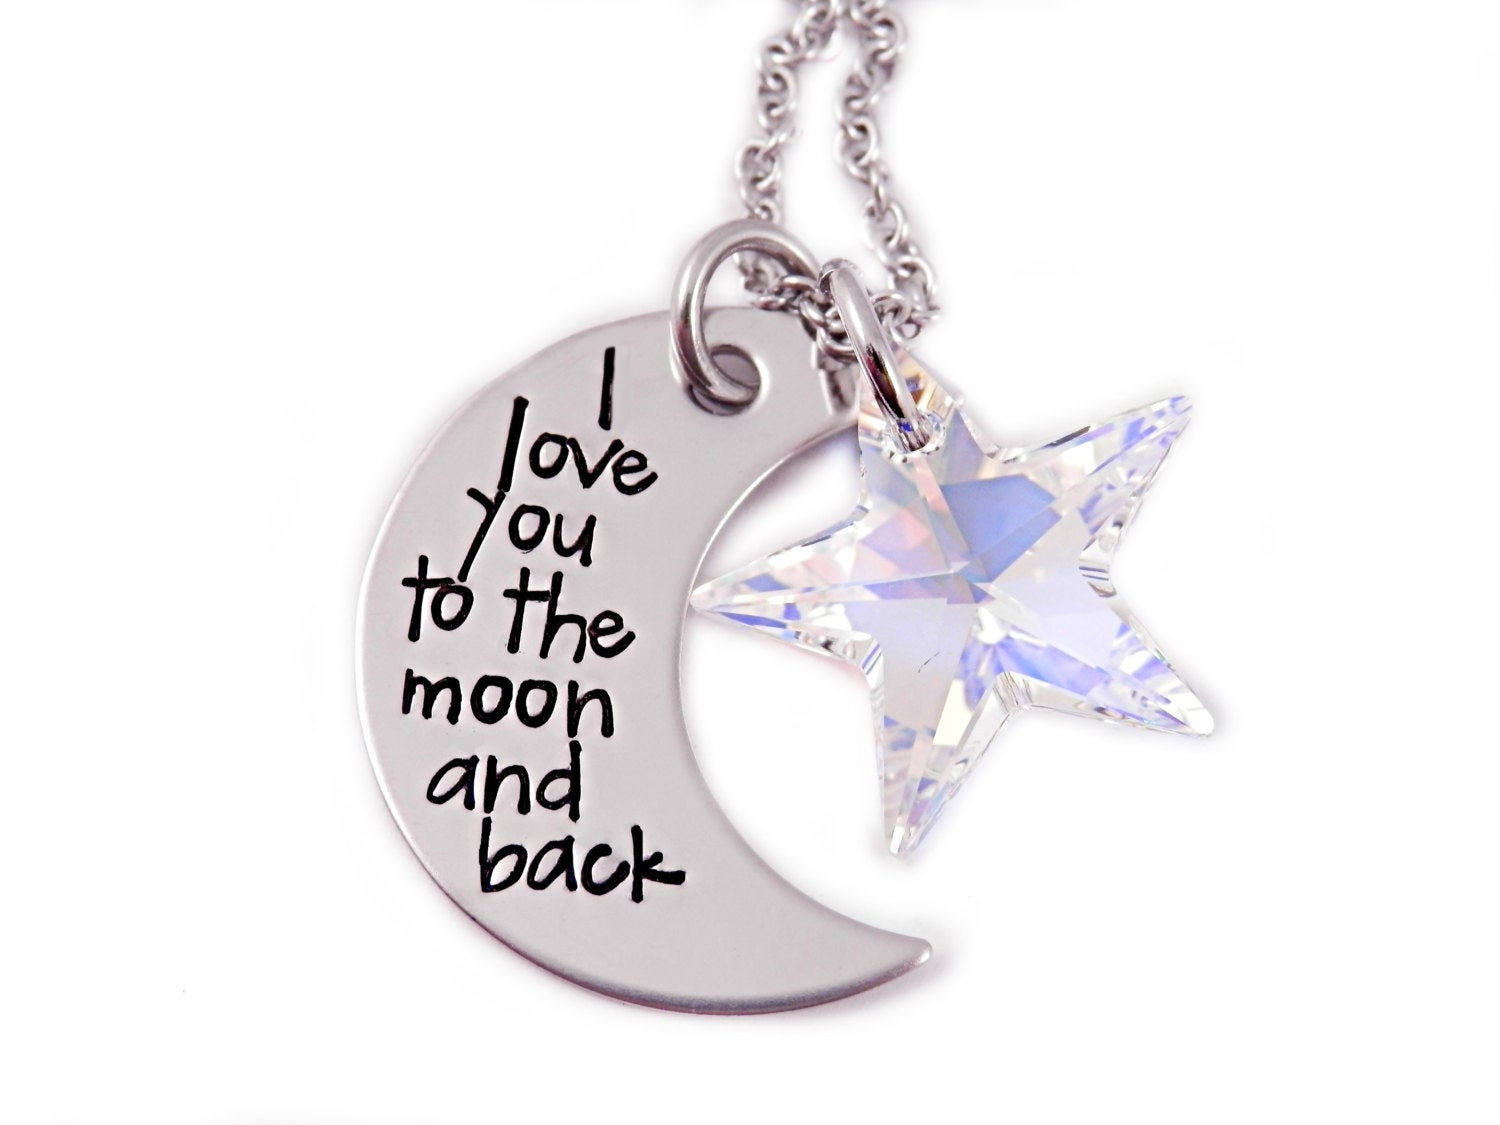 Love You To The Moon And Back Bracelet
 I Love You To The Moon And Back Hand Stamped Jewelry